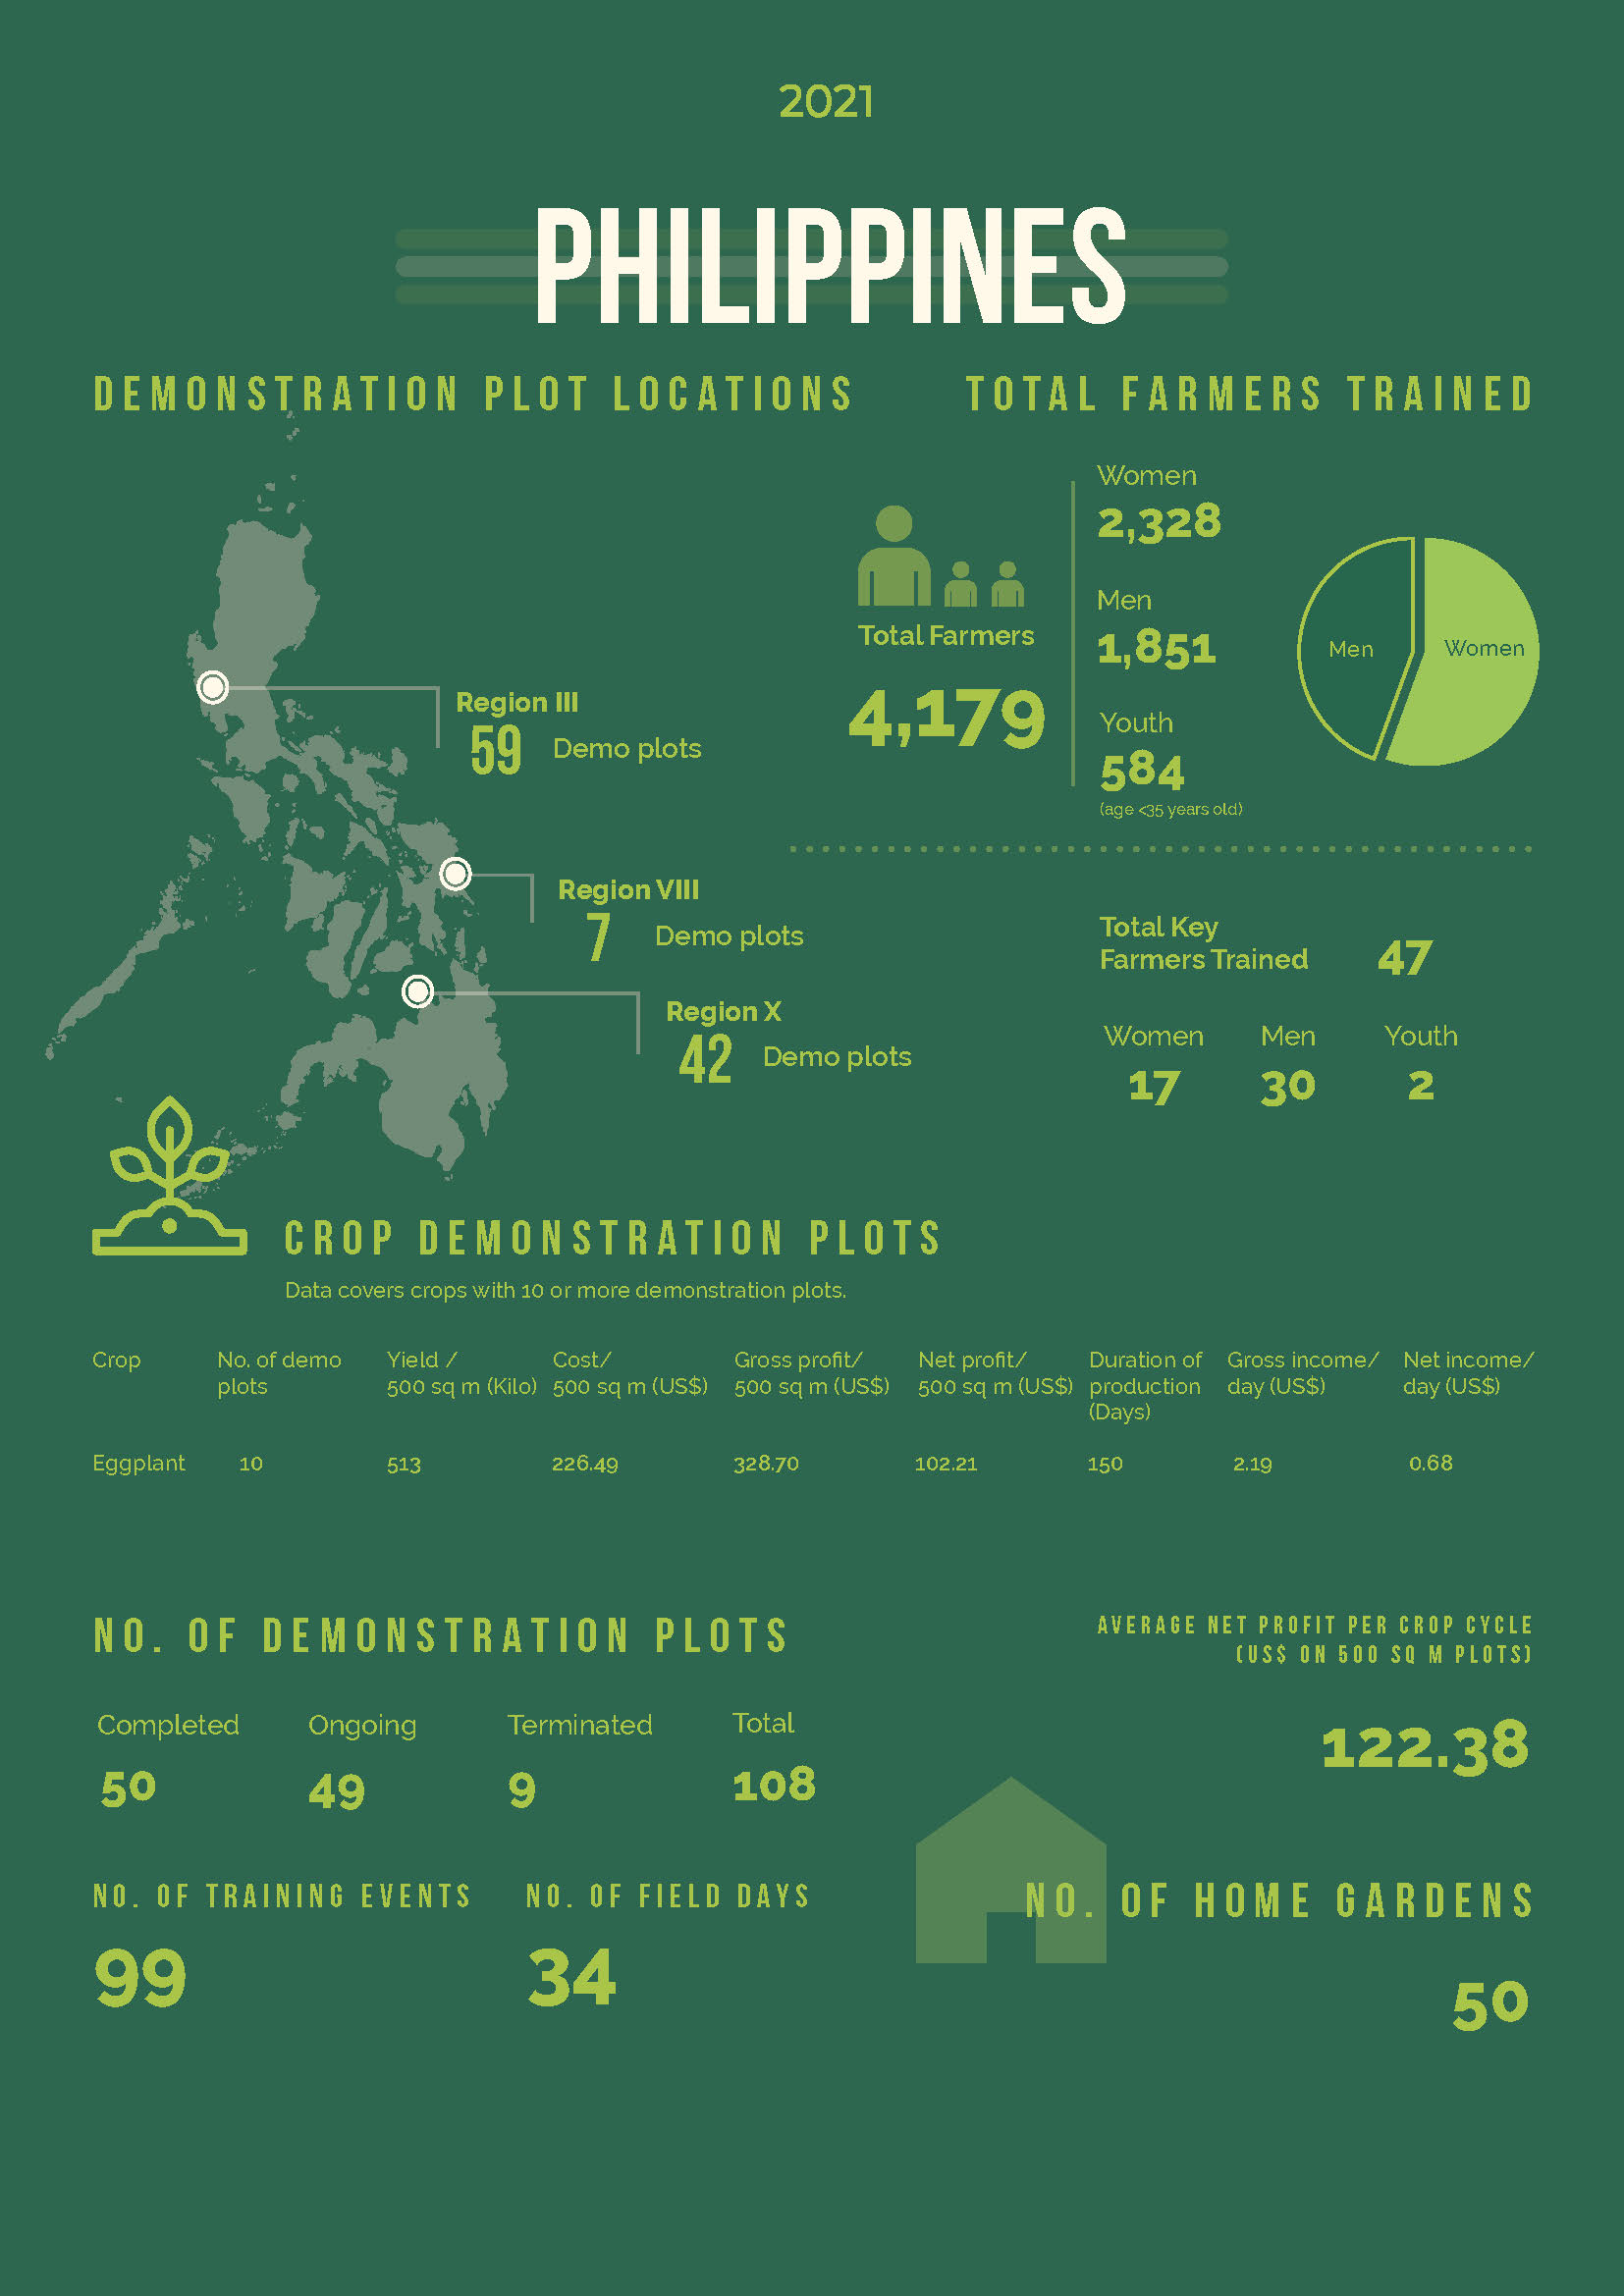 Image of Philippines page in 2021 Annual Report